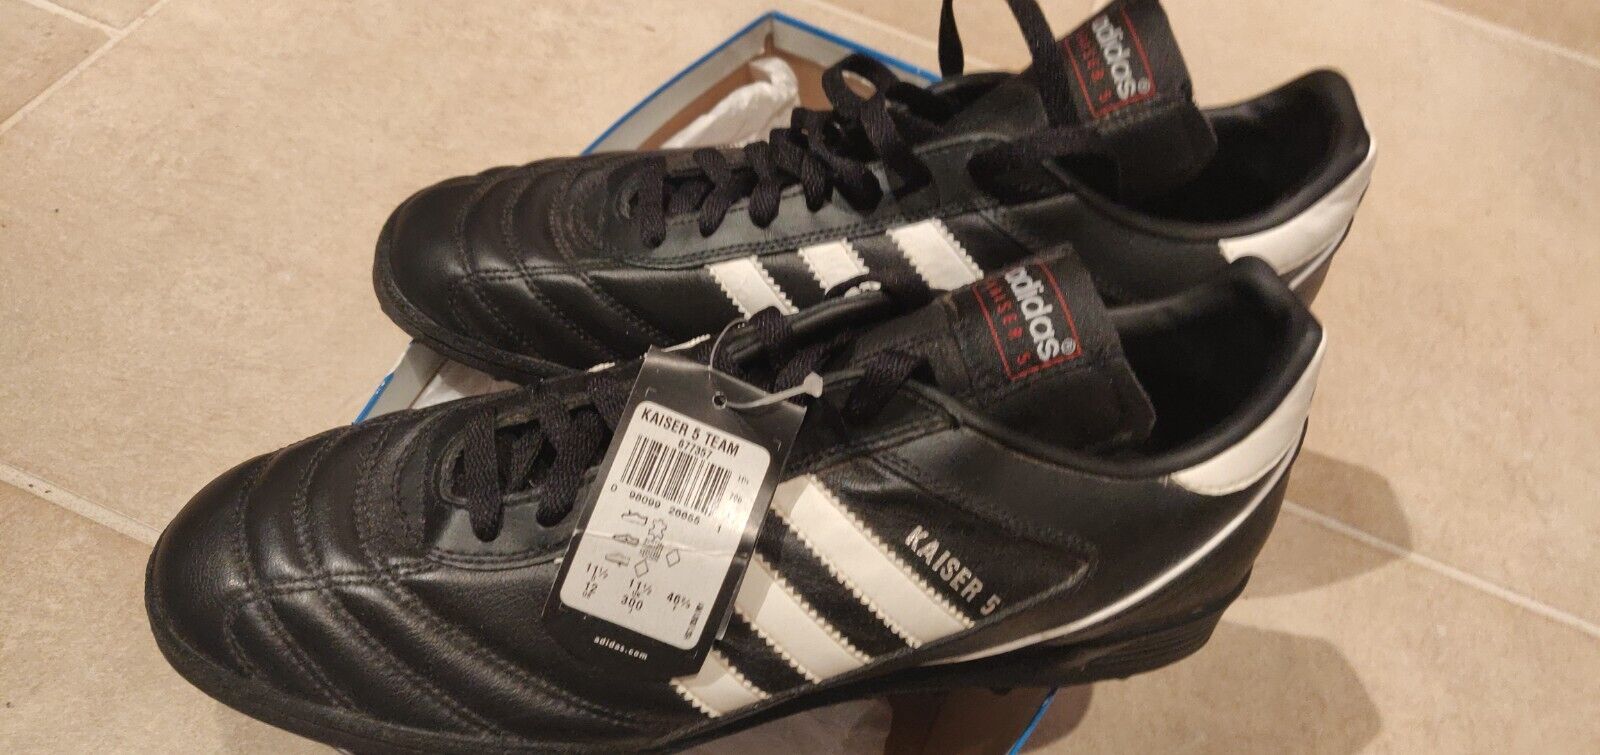 Adidas Kaiser 5 Team Soccer Indoor and/or Turf Leather Black / White 12